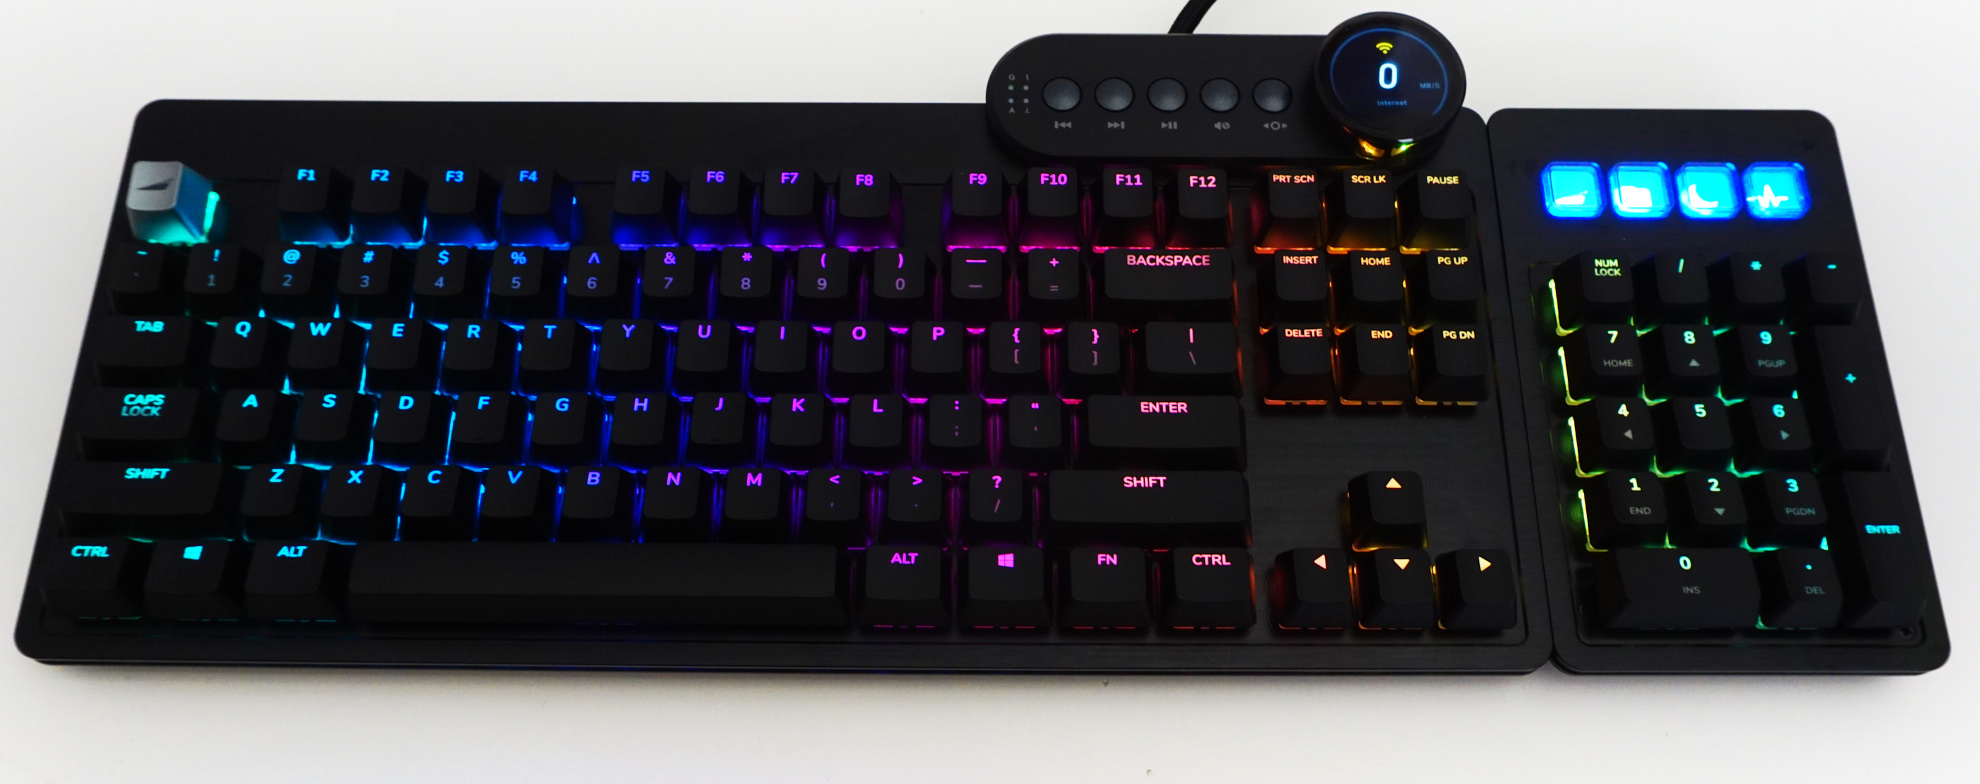 The Mountain Everest Max Mechanical Keyboard Review: Reaching New Heights  in Build Quality